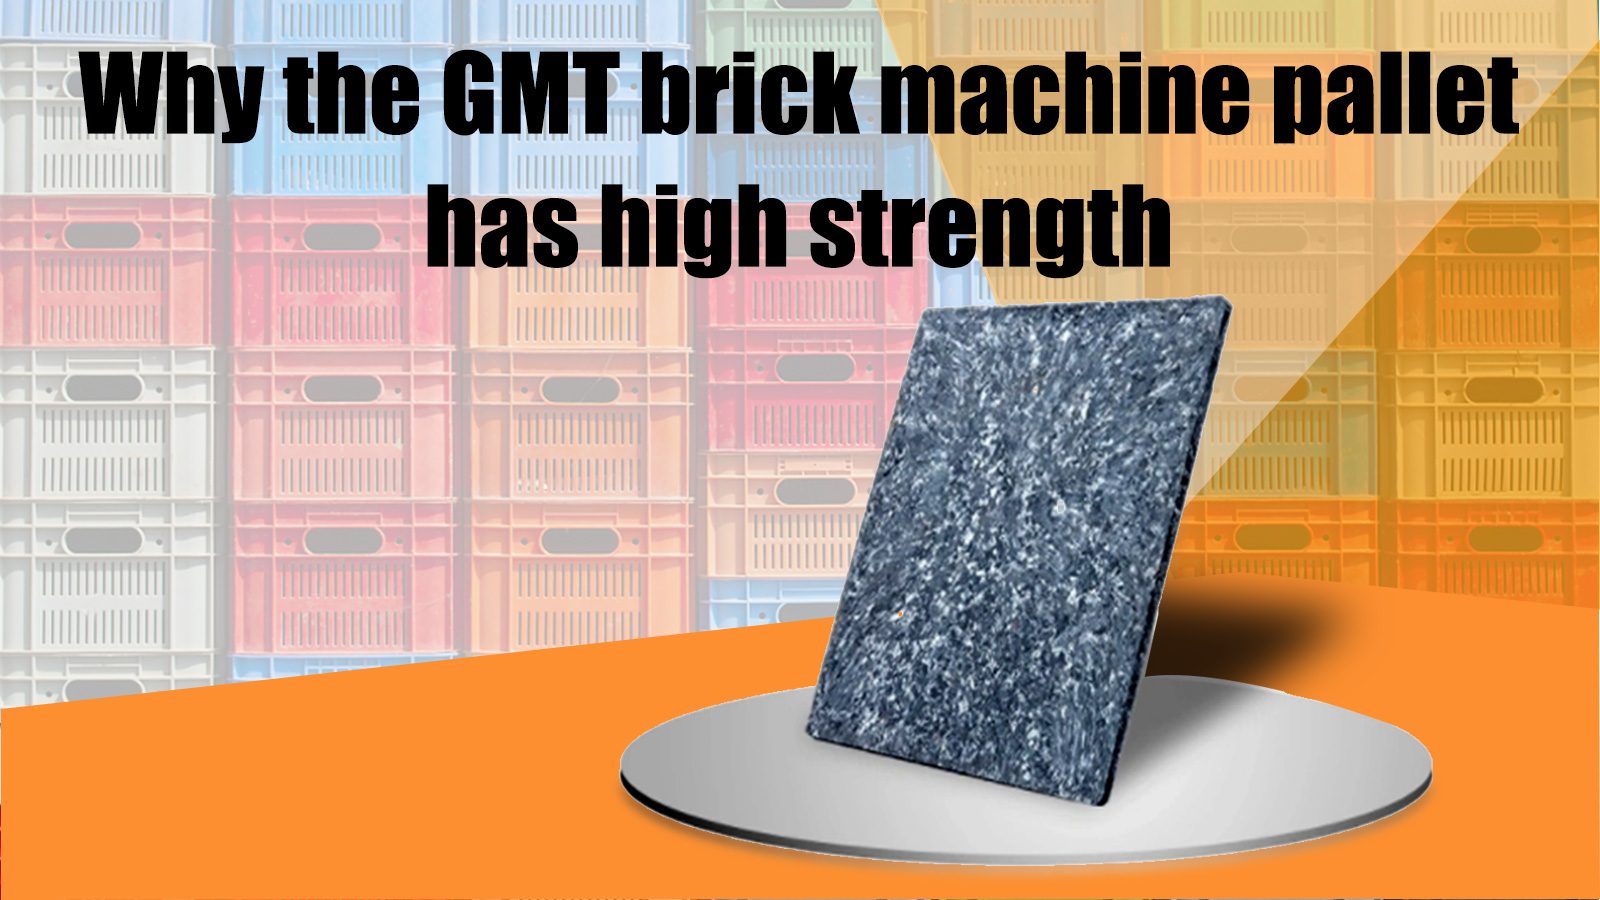 Why the GMT brick machine pallet has high strength